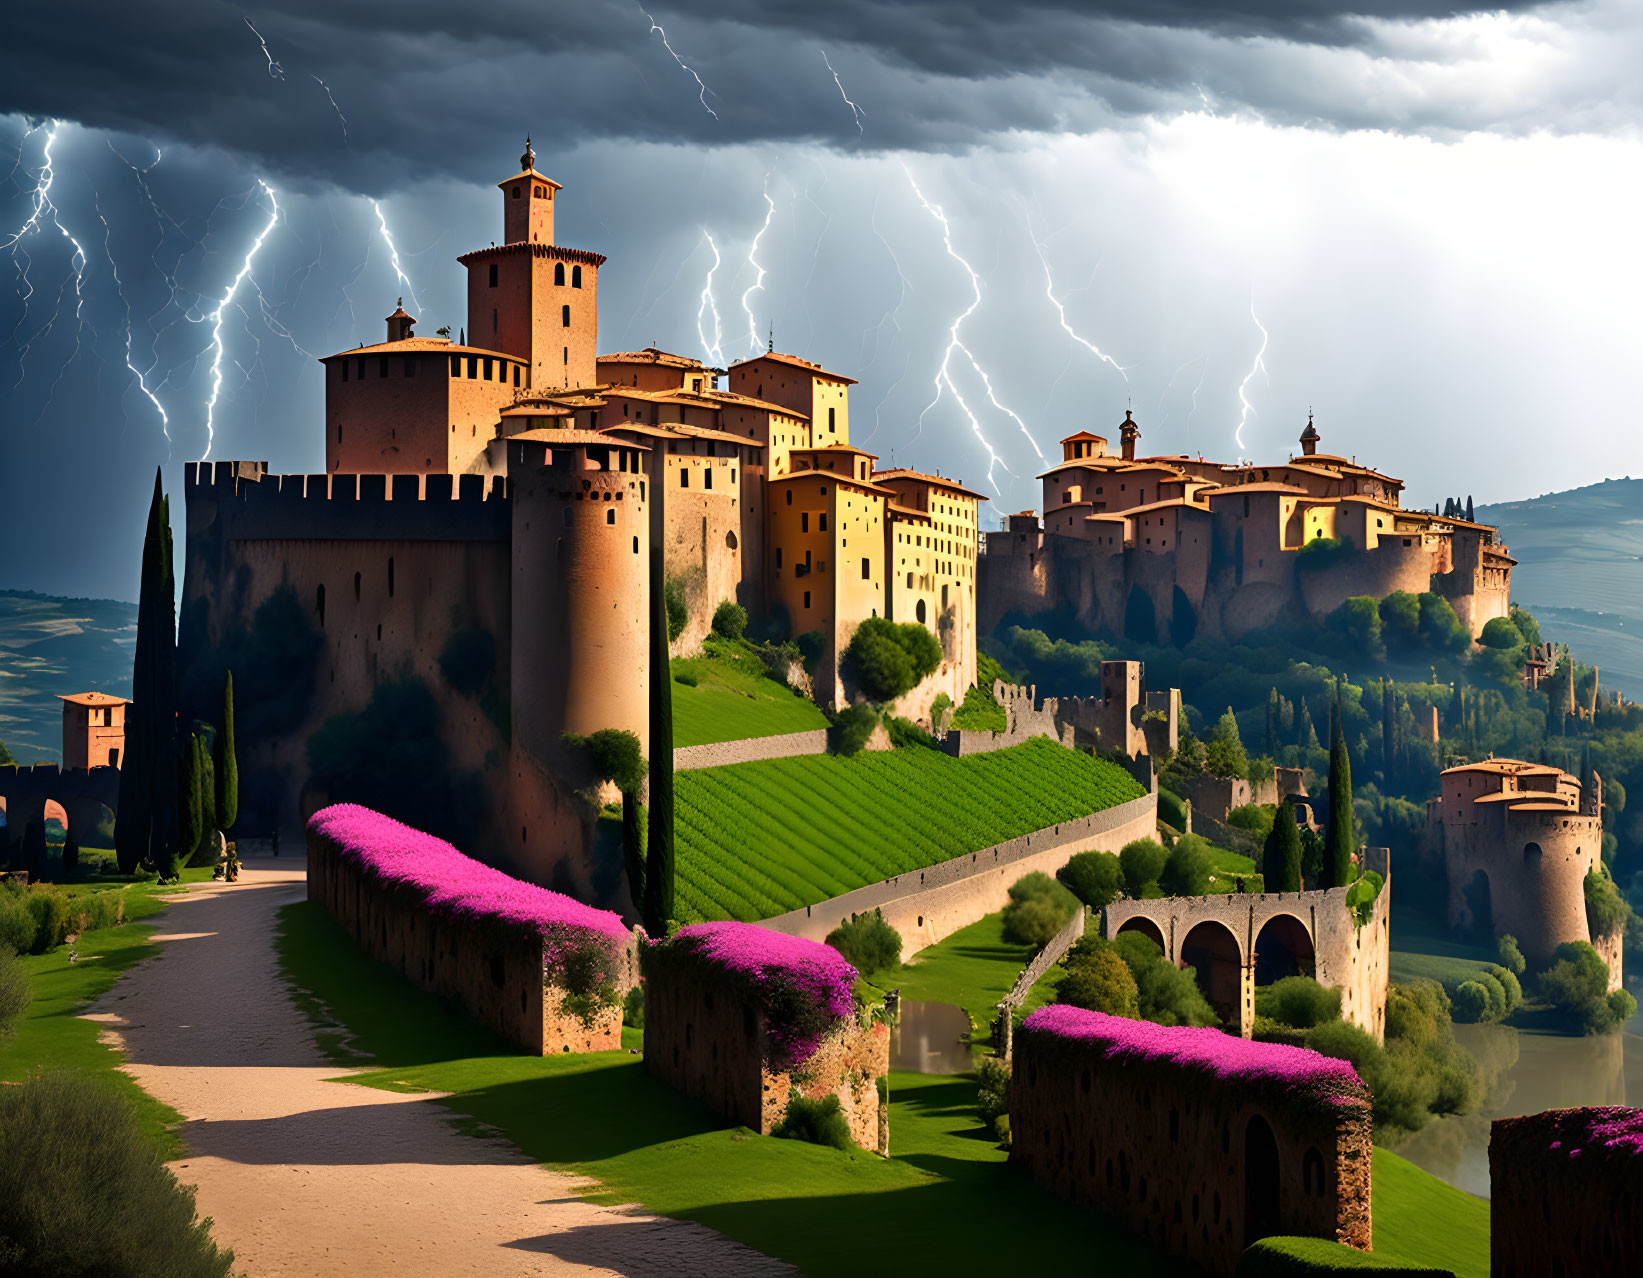 Majestic castle on hill with lush greenery and purple flowers under dramatic lightning-filled sky